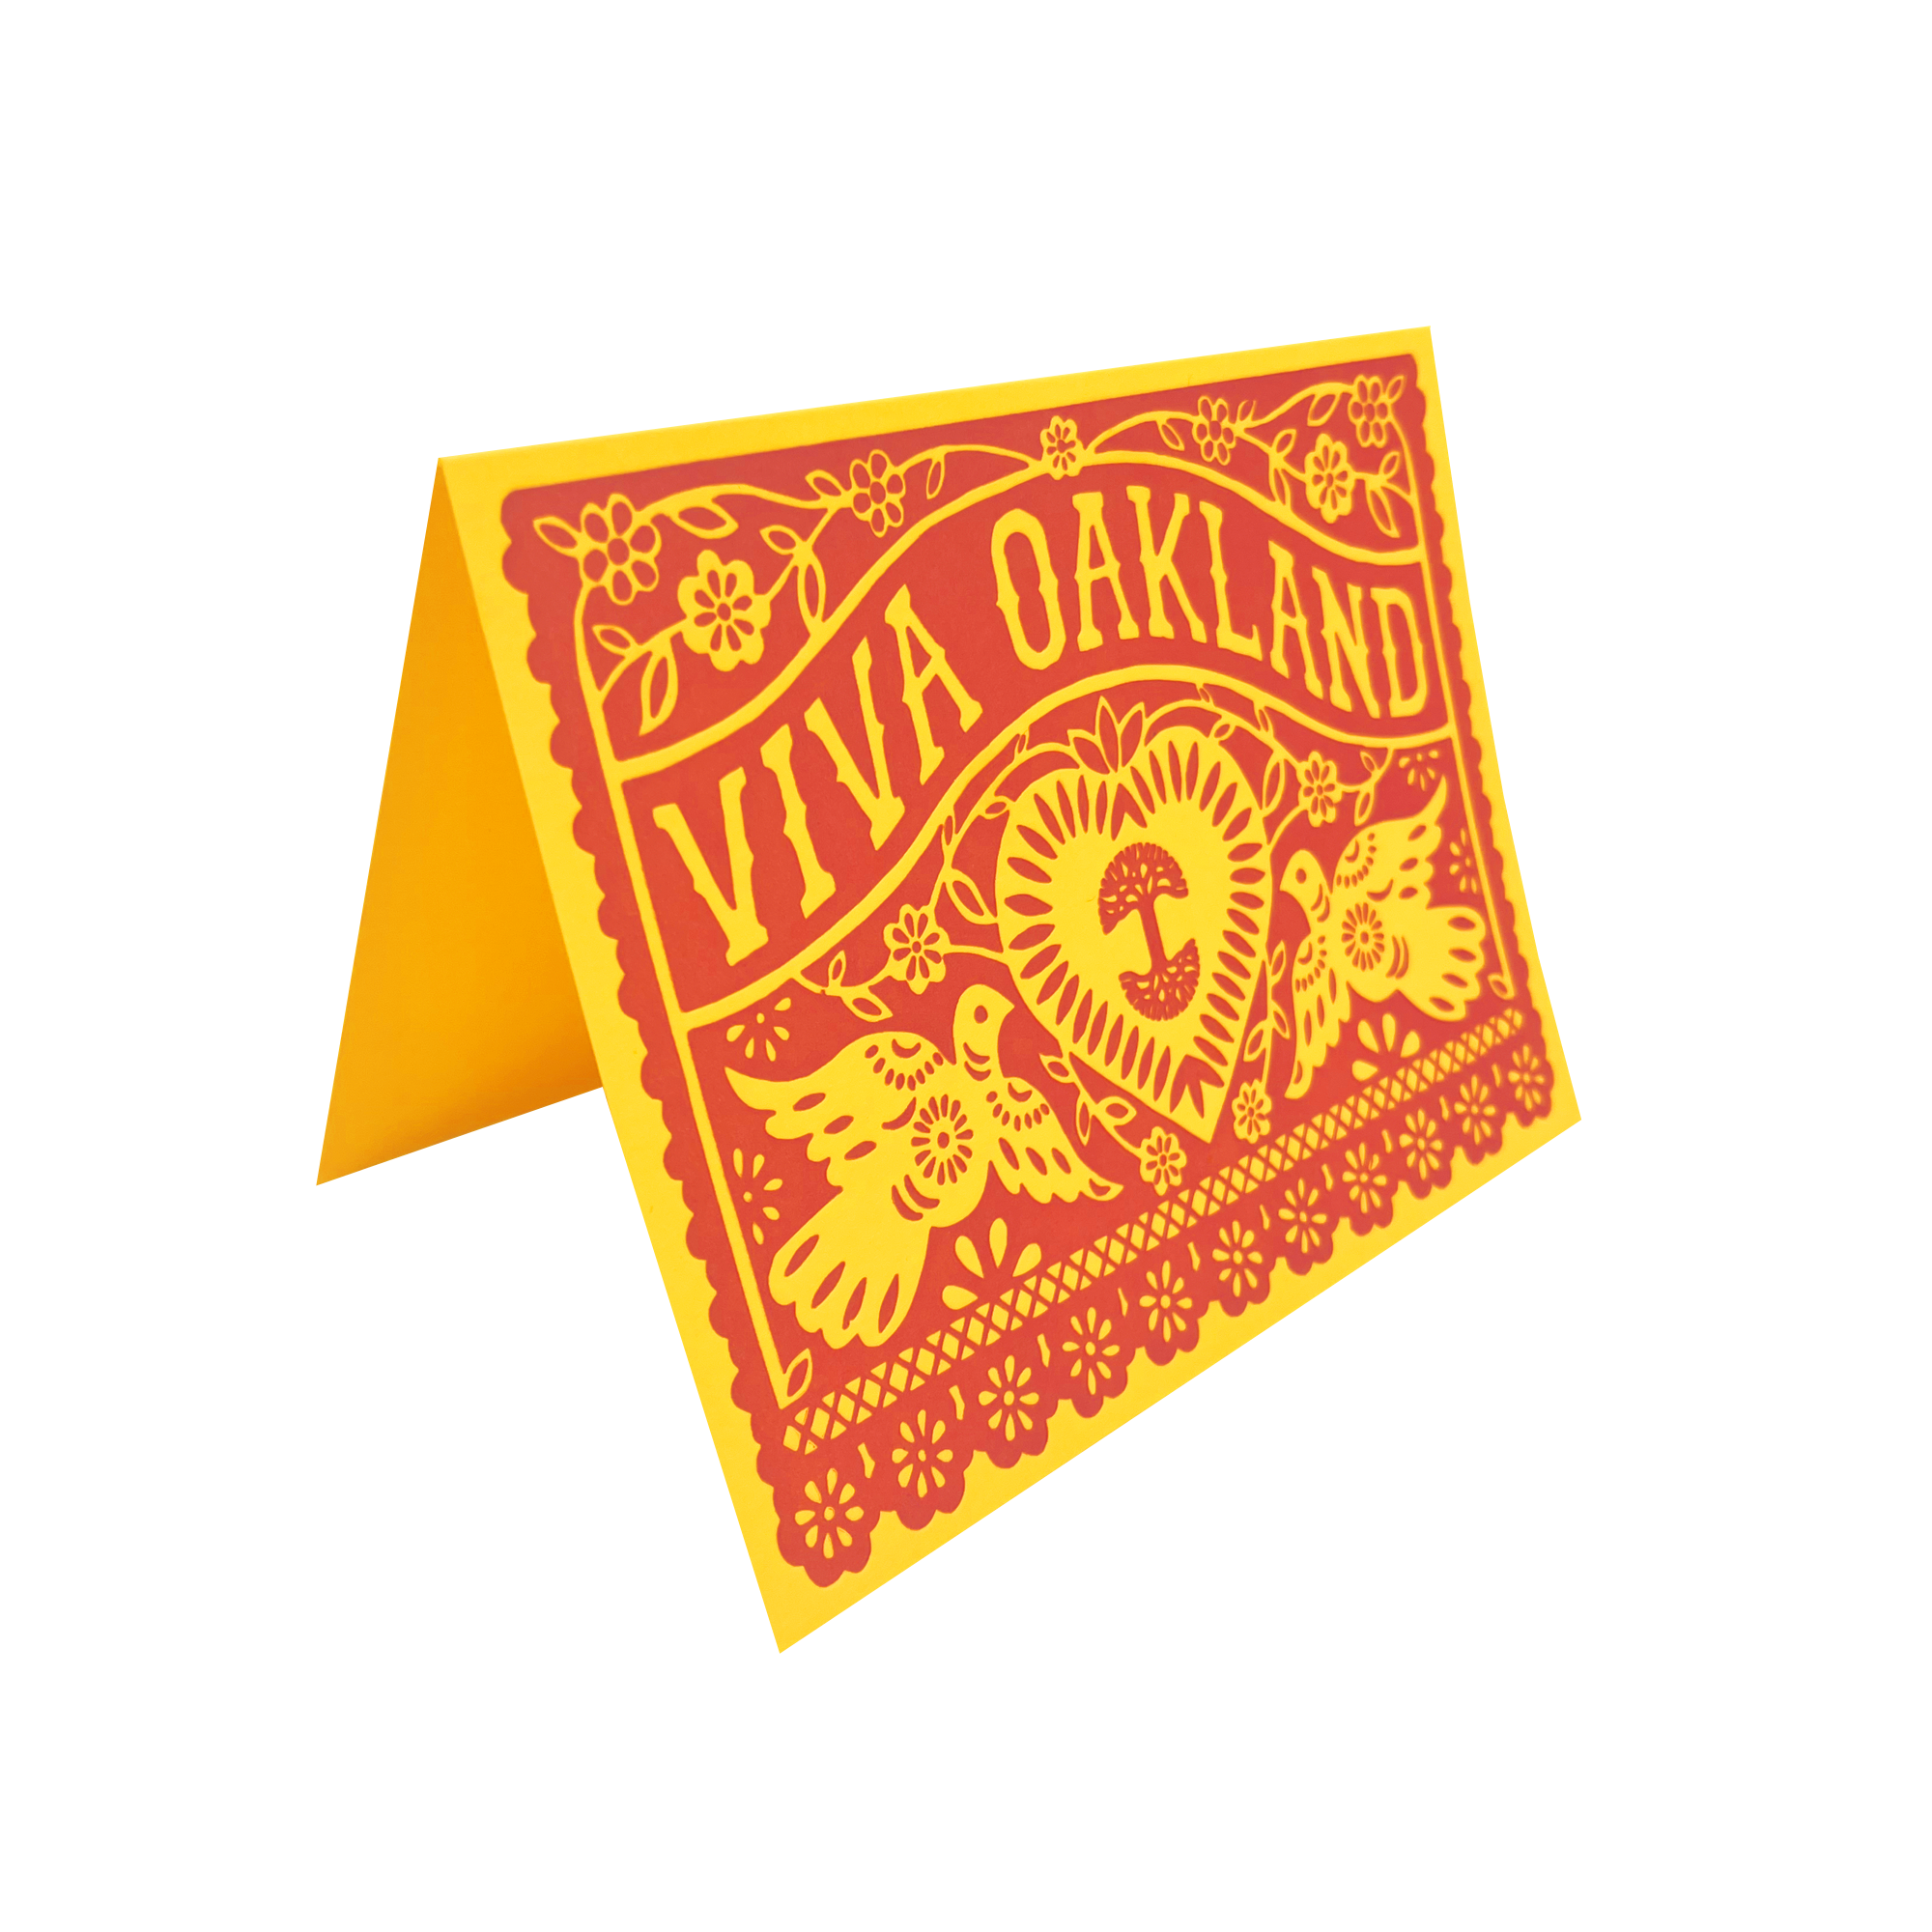 Red and yellow VIVA OAKLAND greeting card open to reveal blank yellow insides.